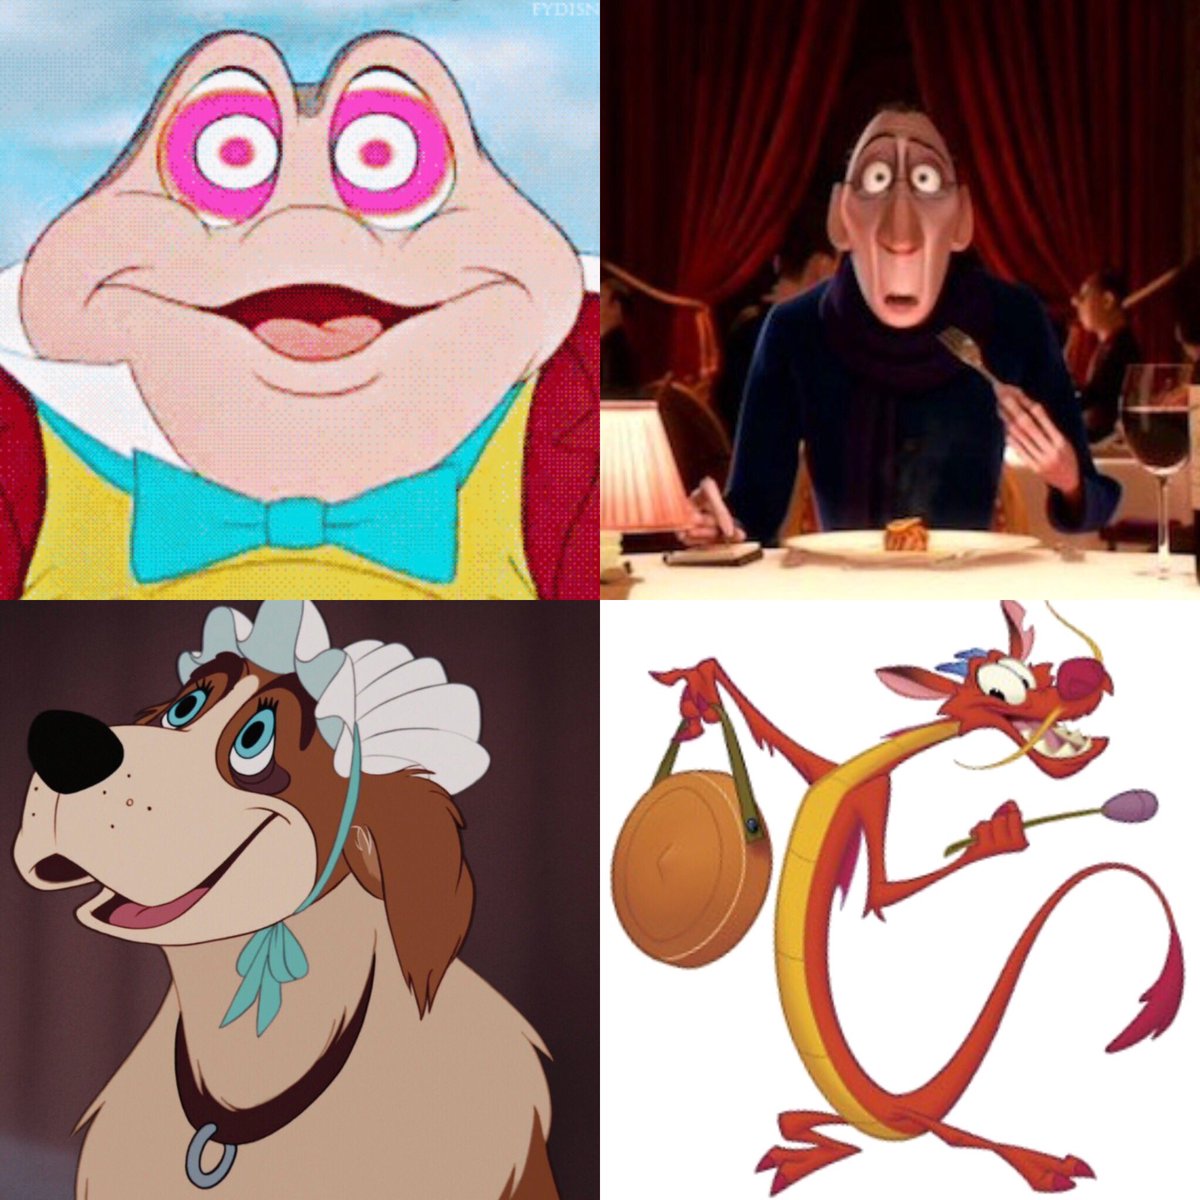 Hate that I’m always making wide-eyes in photos? Blame these folks... #DisneyFour https://t.co/Hjpx2T9yj6